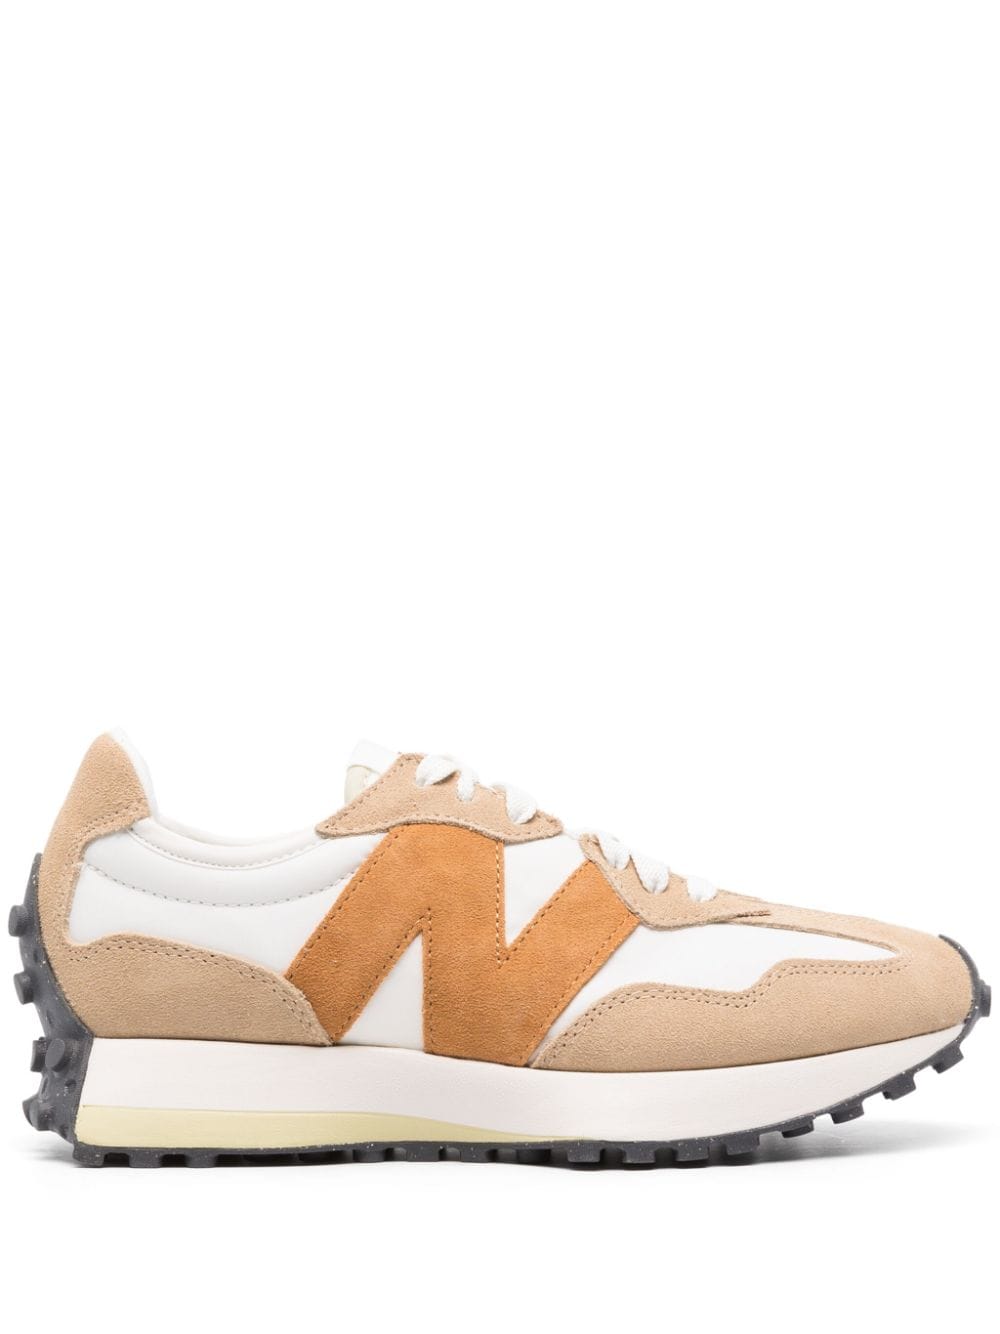 New Balance 327 lace-up sneakers - Neutrals